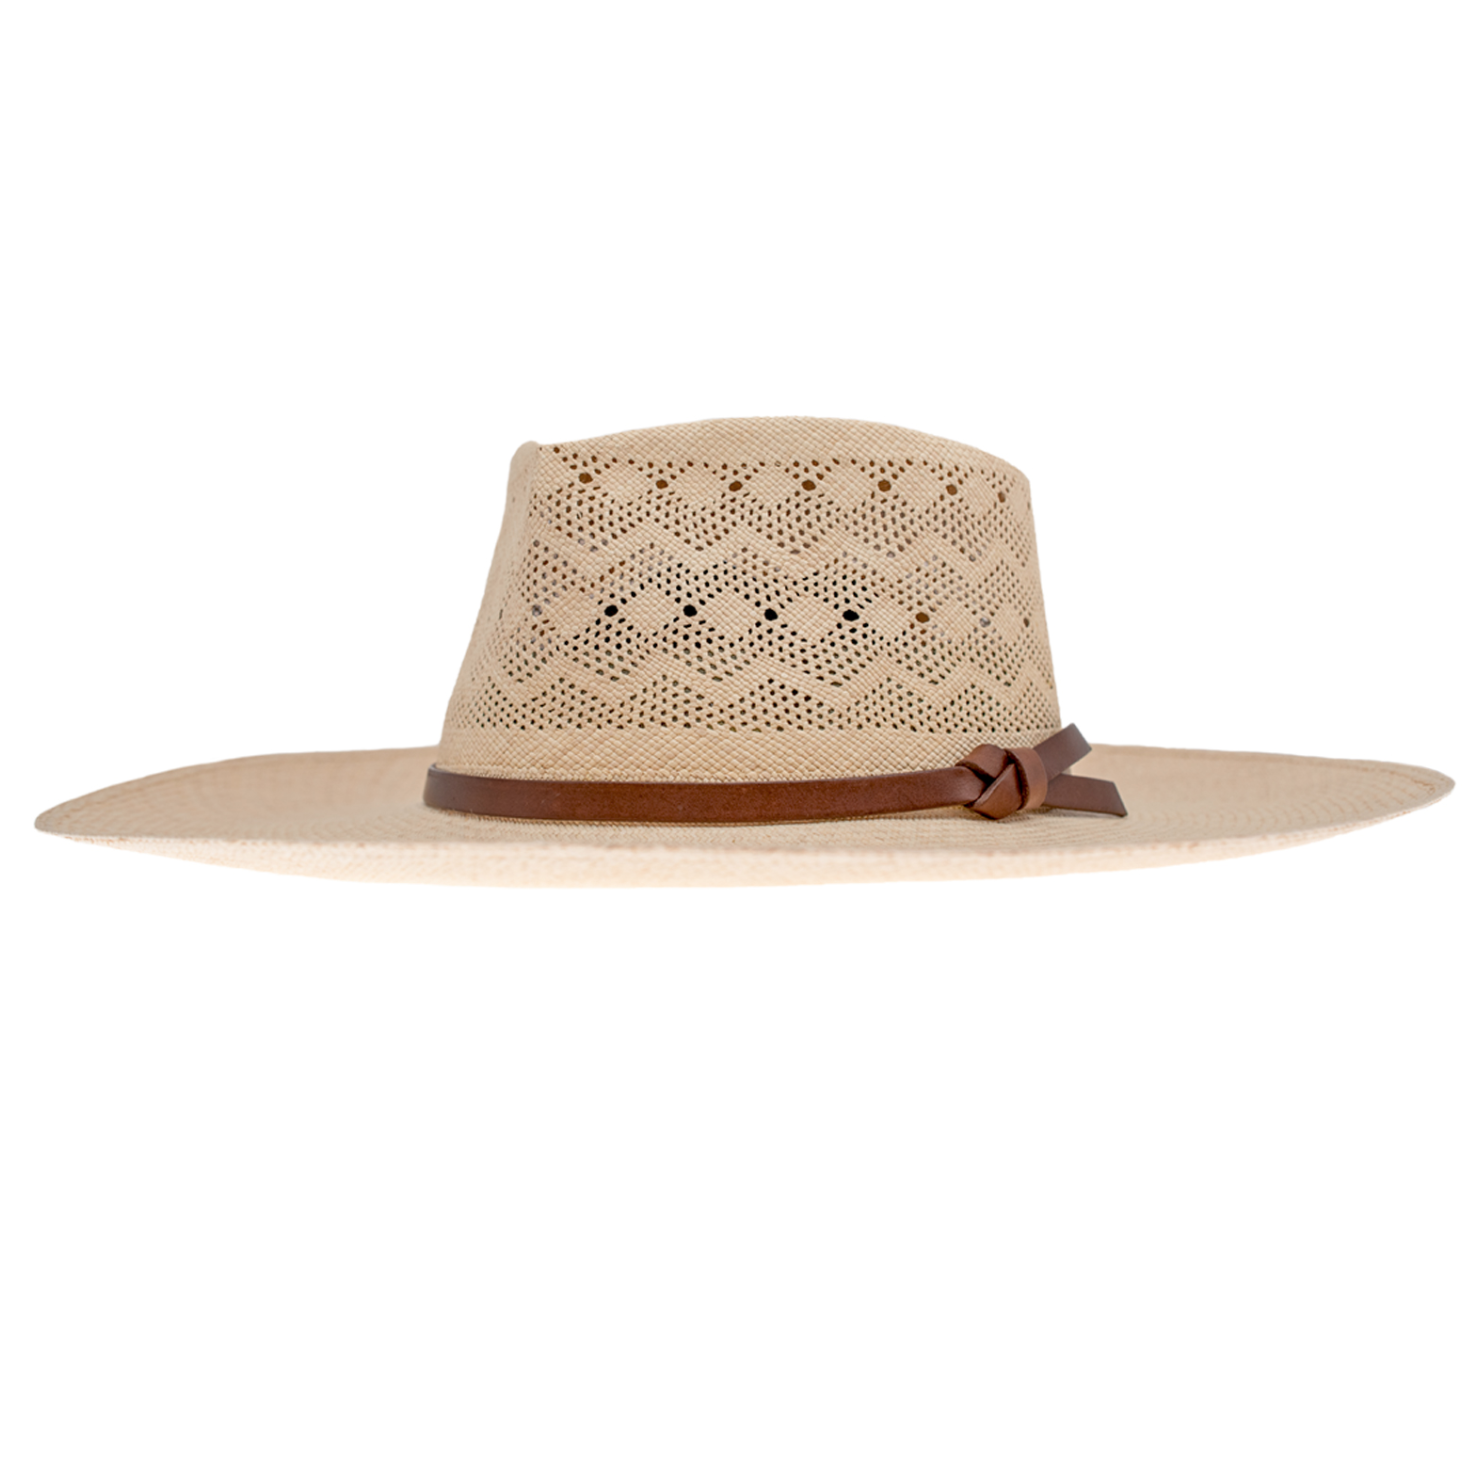 Wide-brimmed Kaela Extra Long Brim M fedora hat with an artisanal weave and a brown leather band, isolated on a white background by Ninakuru.